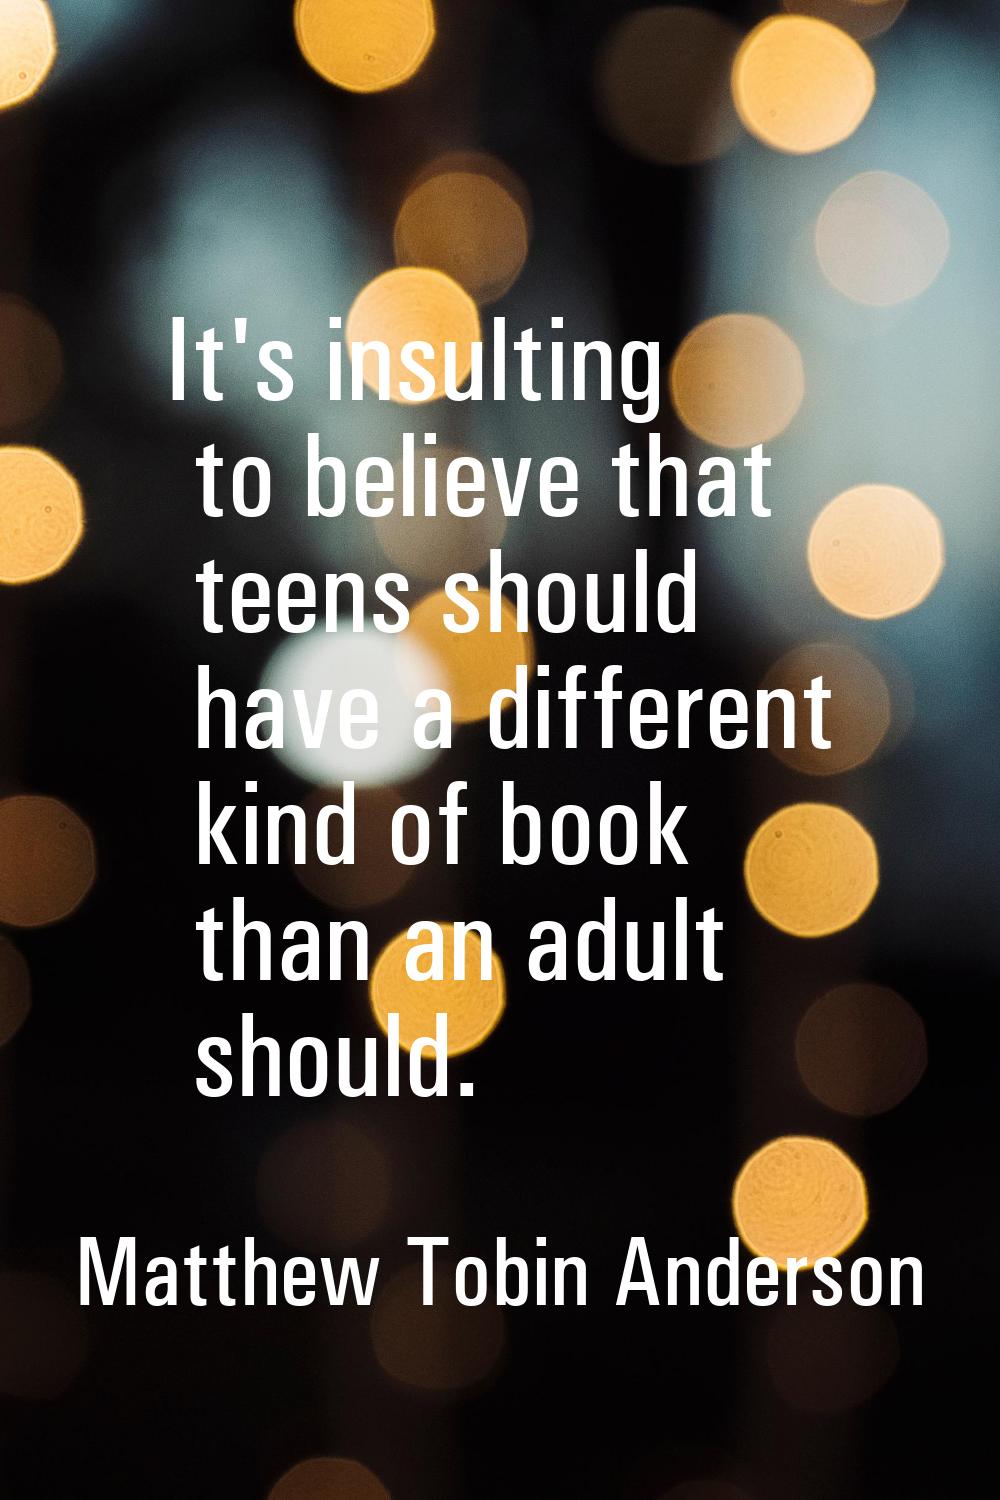 It's insulting to believe that teens should have a different kind of book than an adult should.